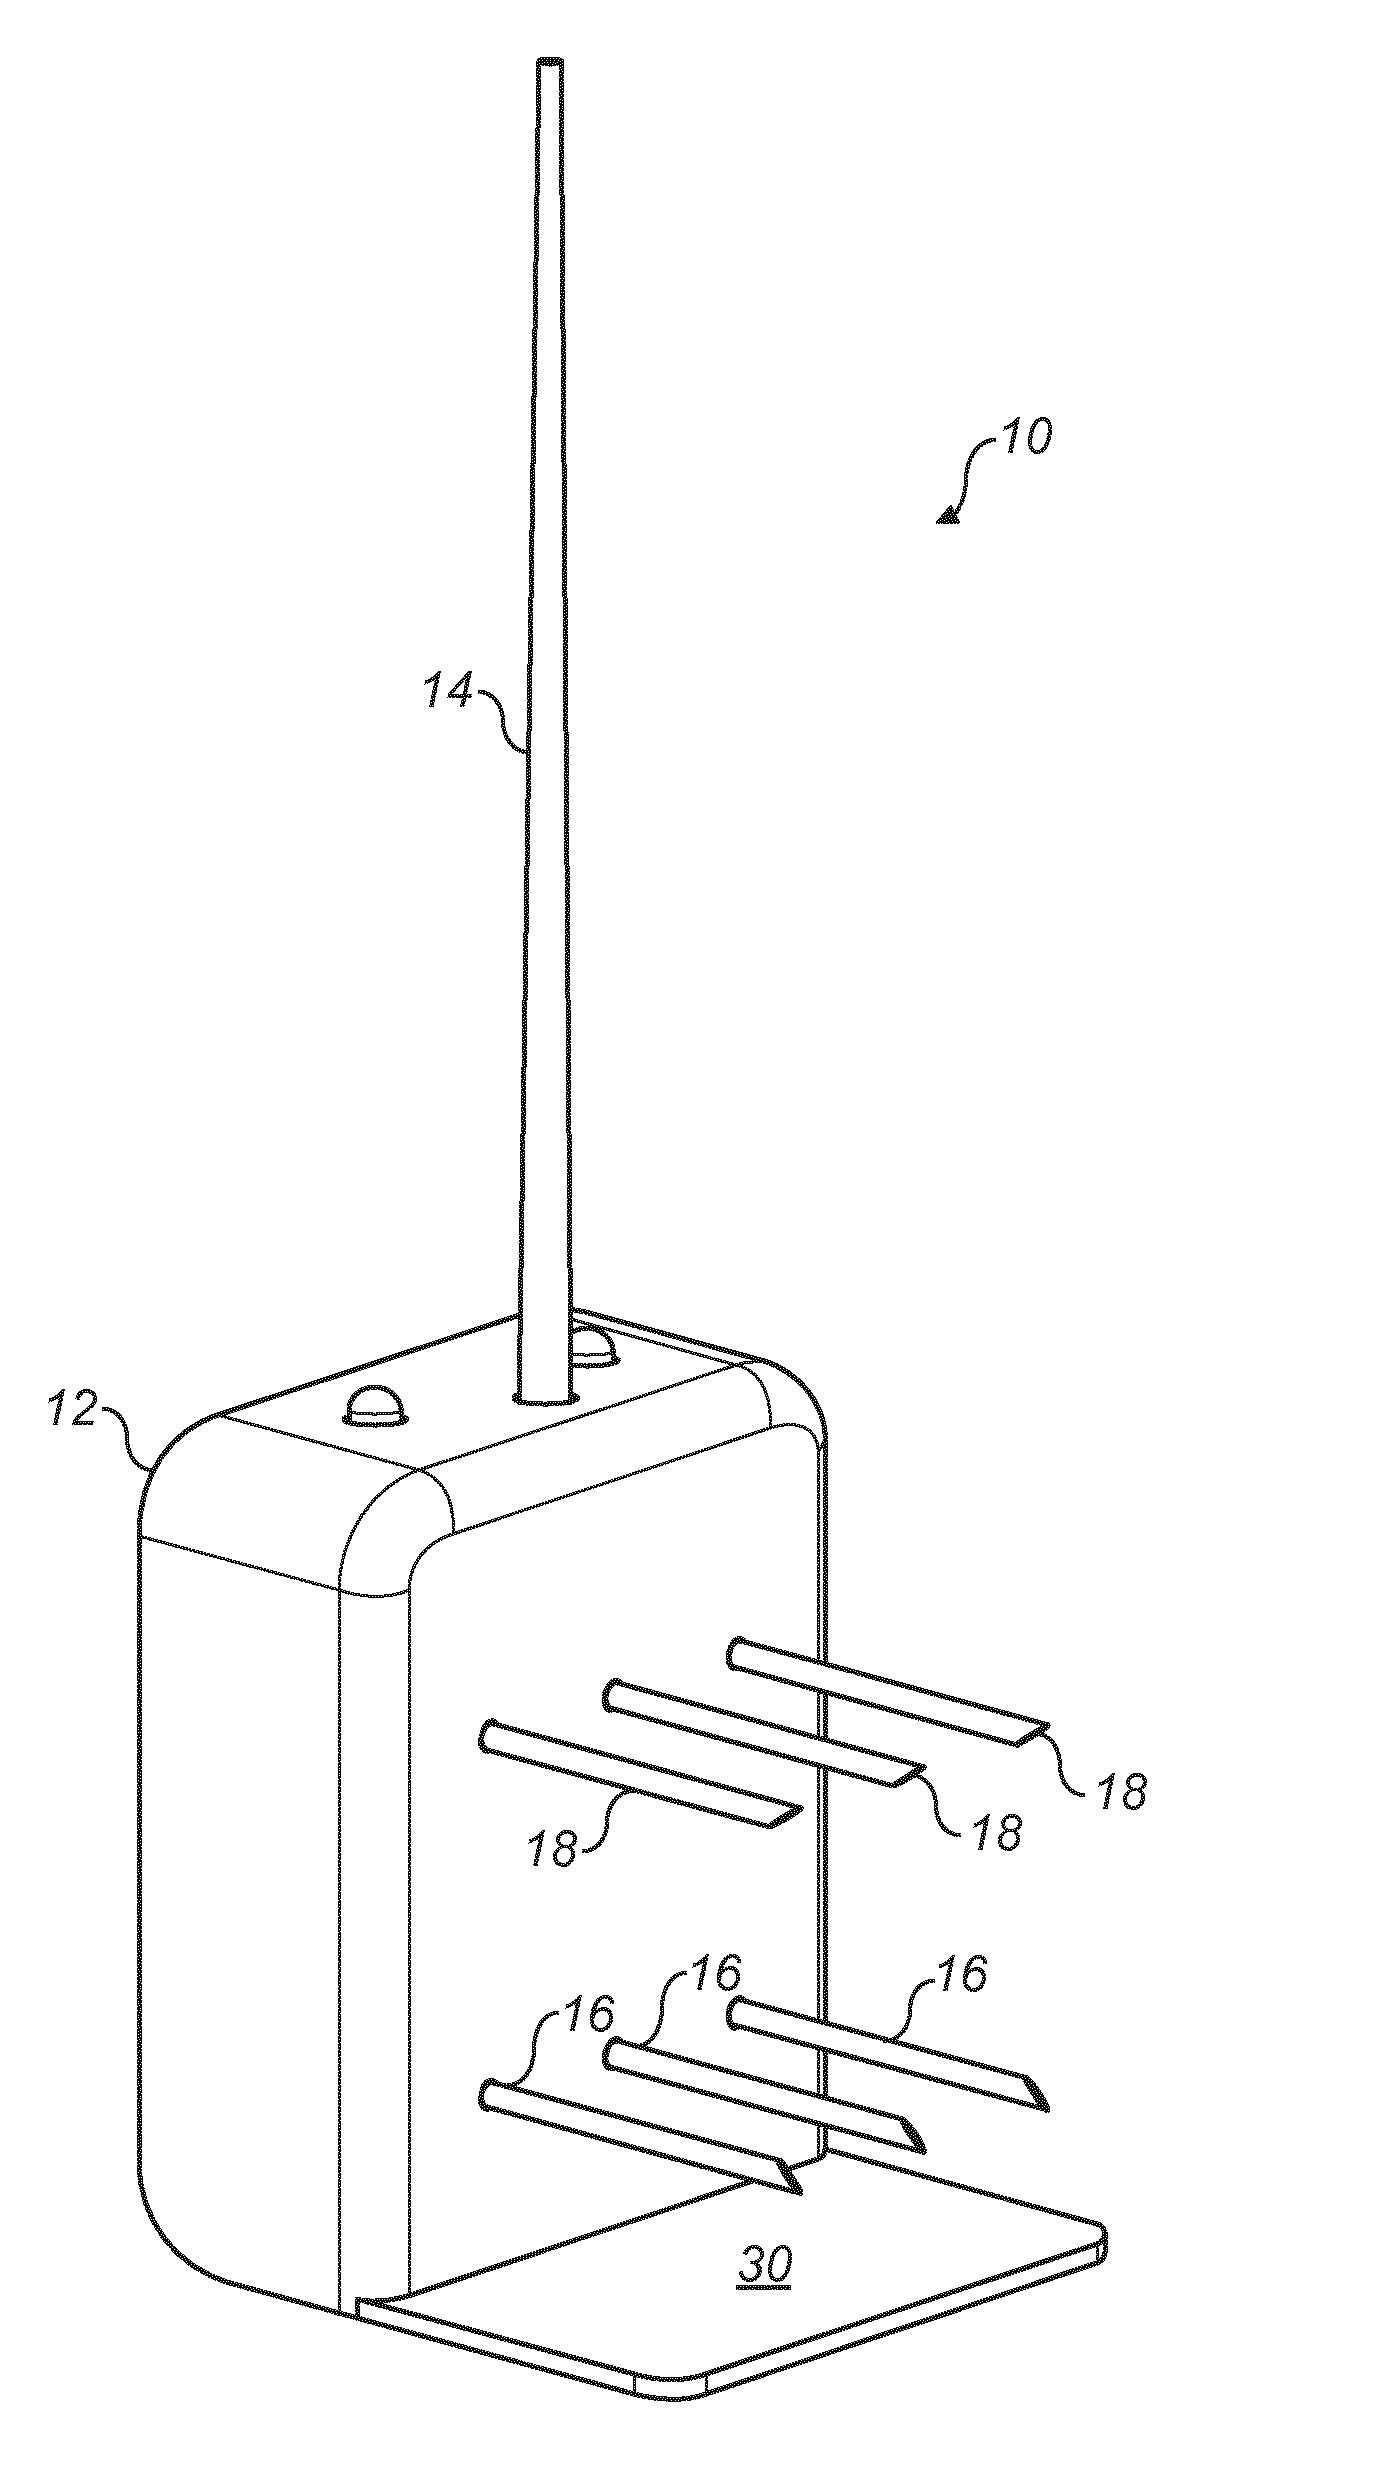 Device and method for measuring plant growth conditions